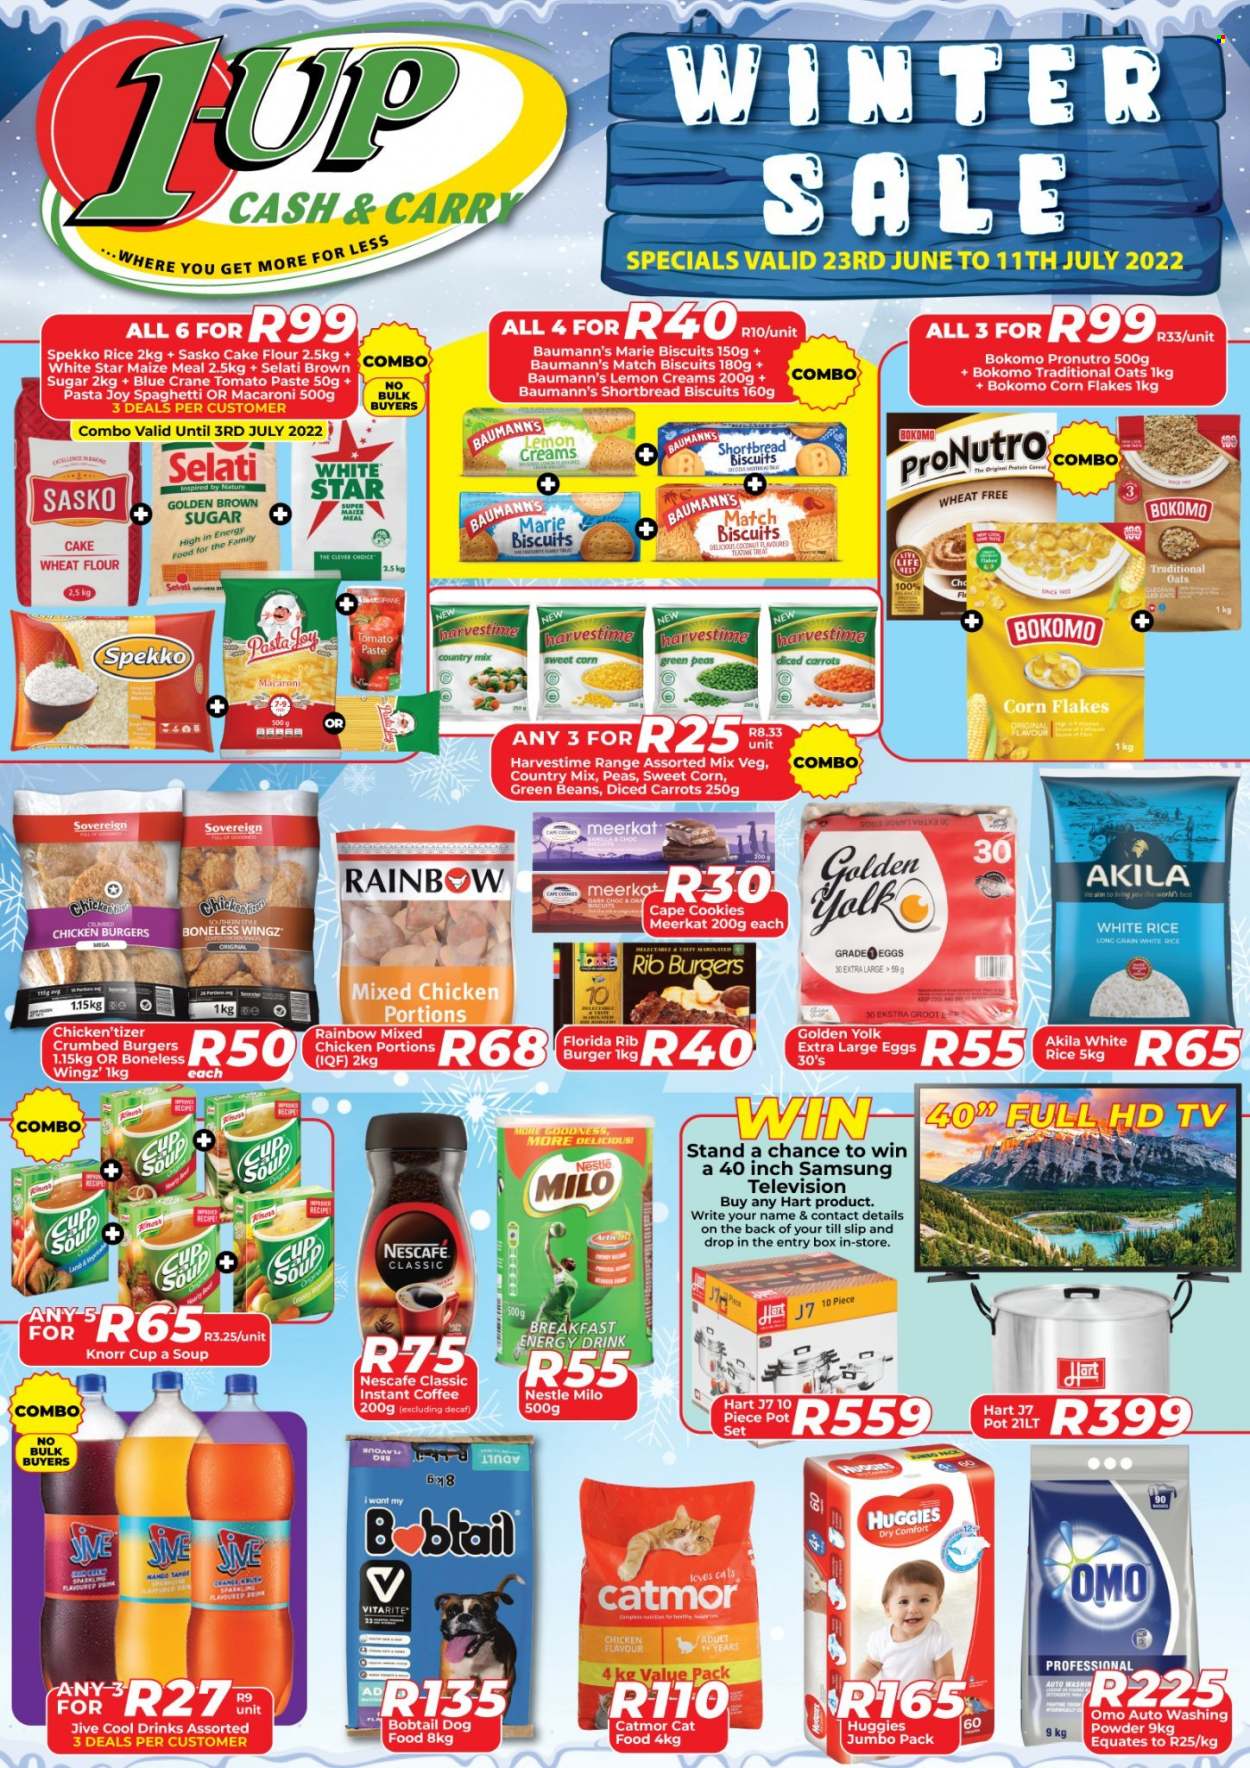 1UP Cash & Carry Specials  - 06.23.2022 - 07.11.2022. Page 1.